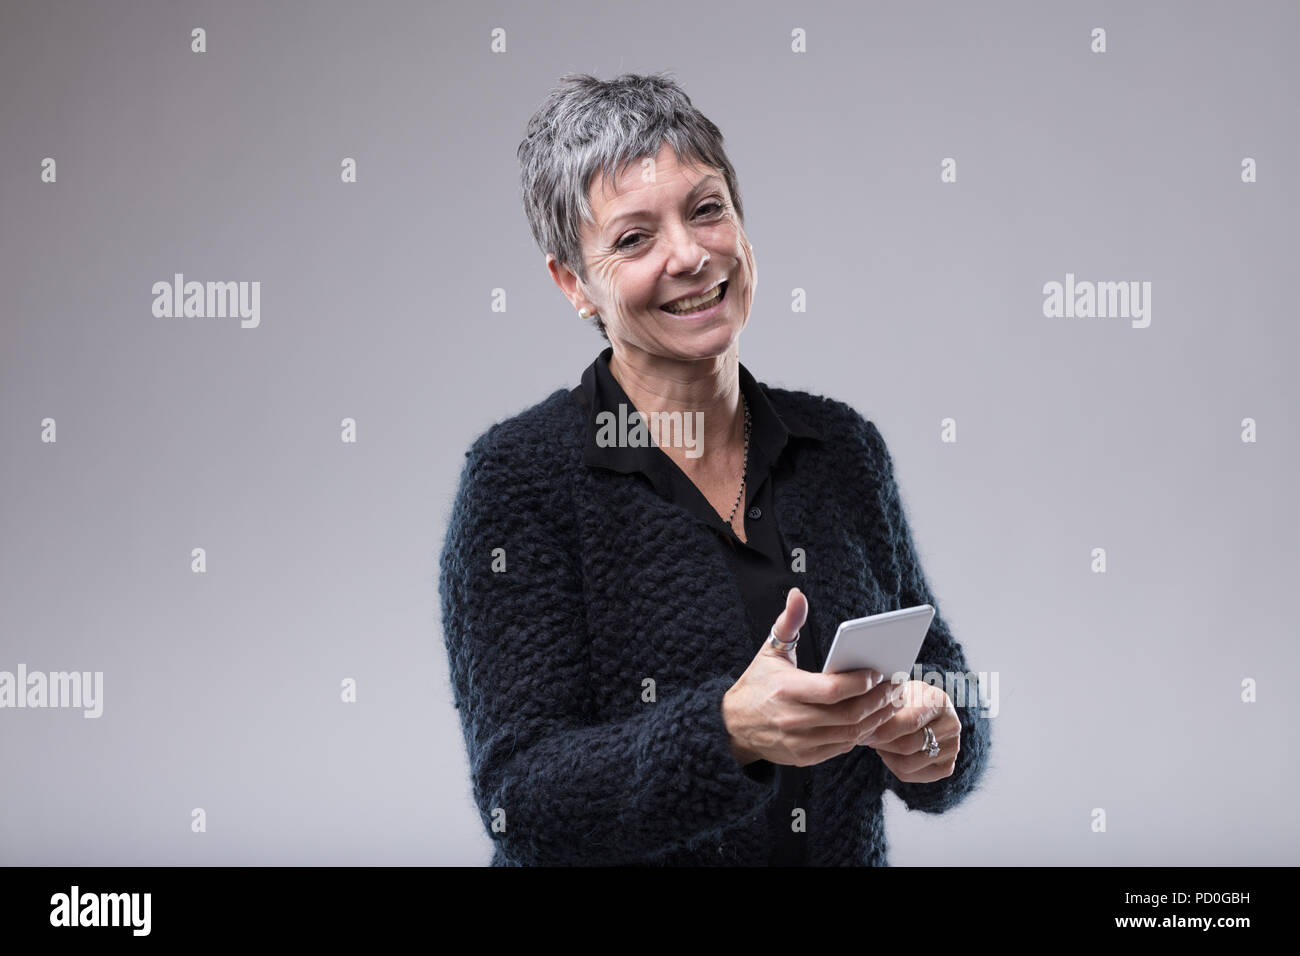 Charismatic older woman with a sweet smile holding a mobile phone in her hands as she looks at the camera over grey with copy space Stock Photo